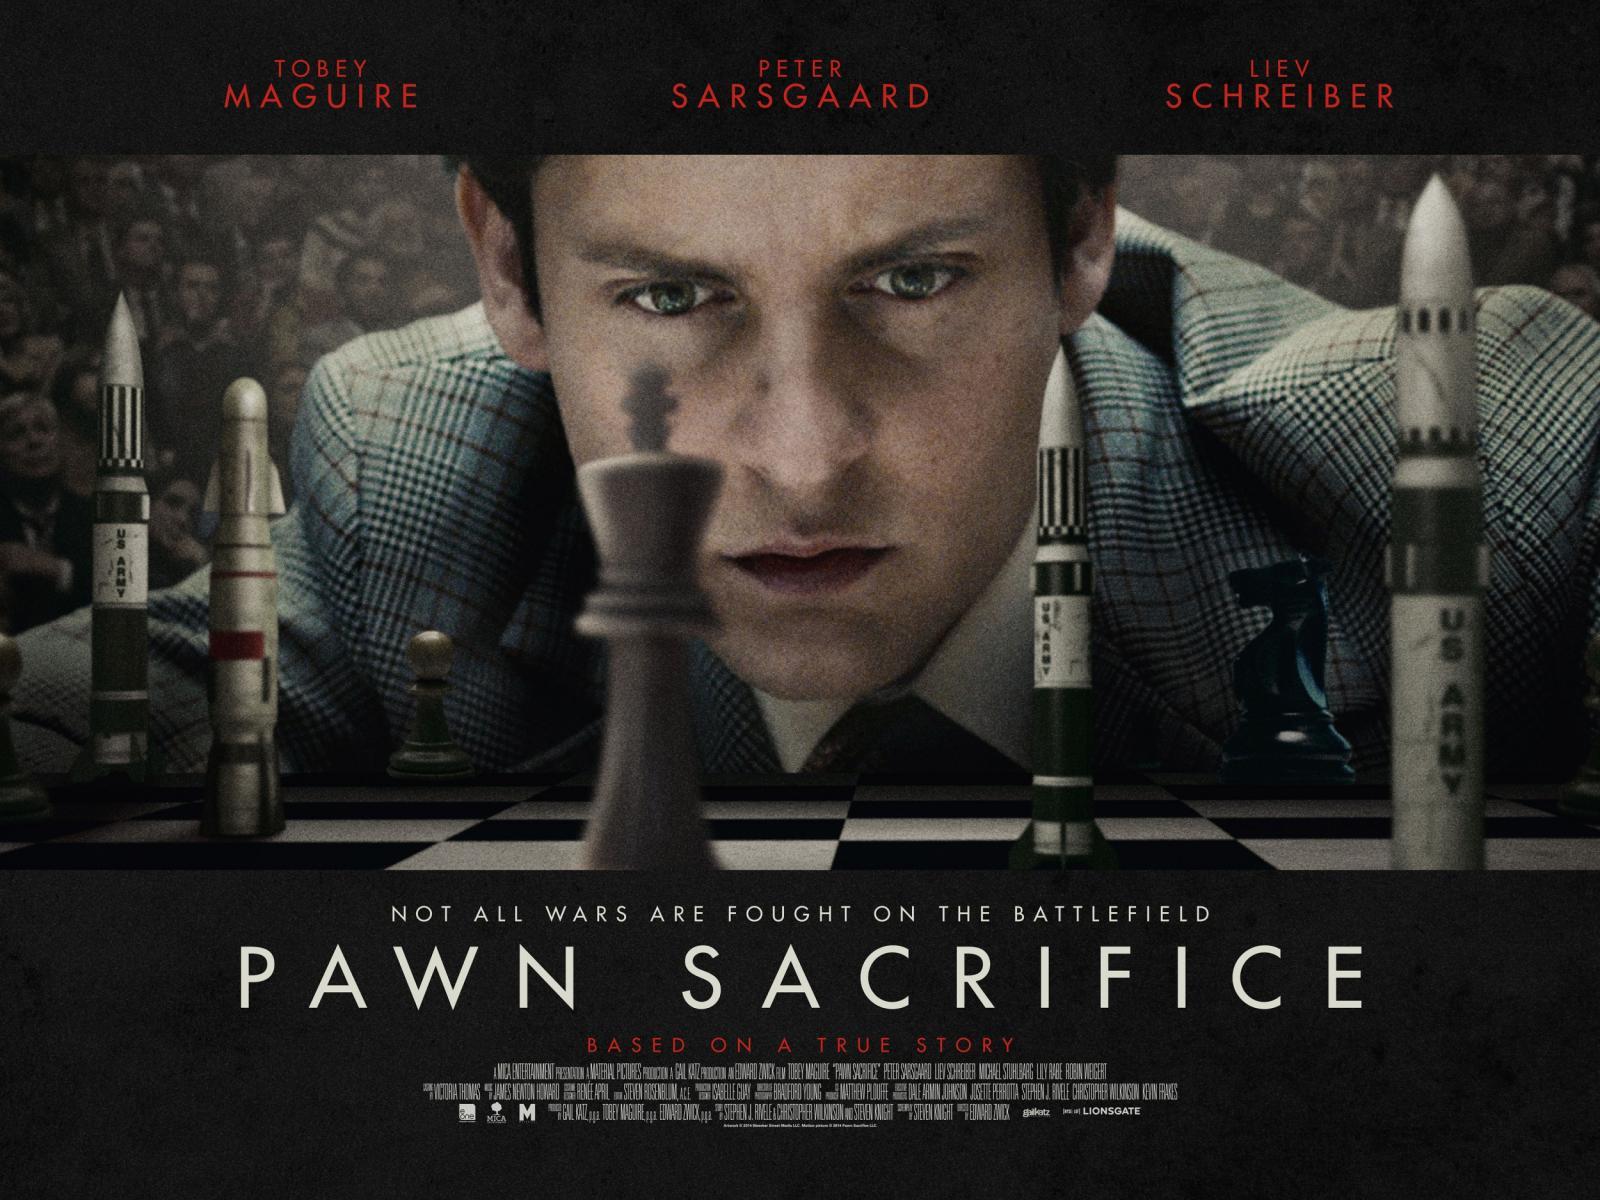 A wonderfully done chess movie that shows the tension and toll that was taken on Bobby Fisher at the height of his career .